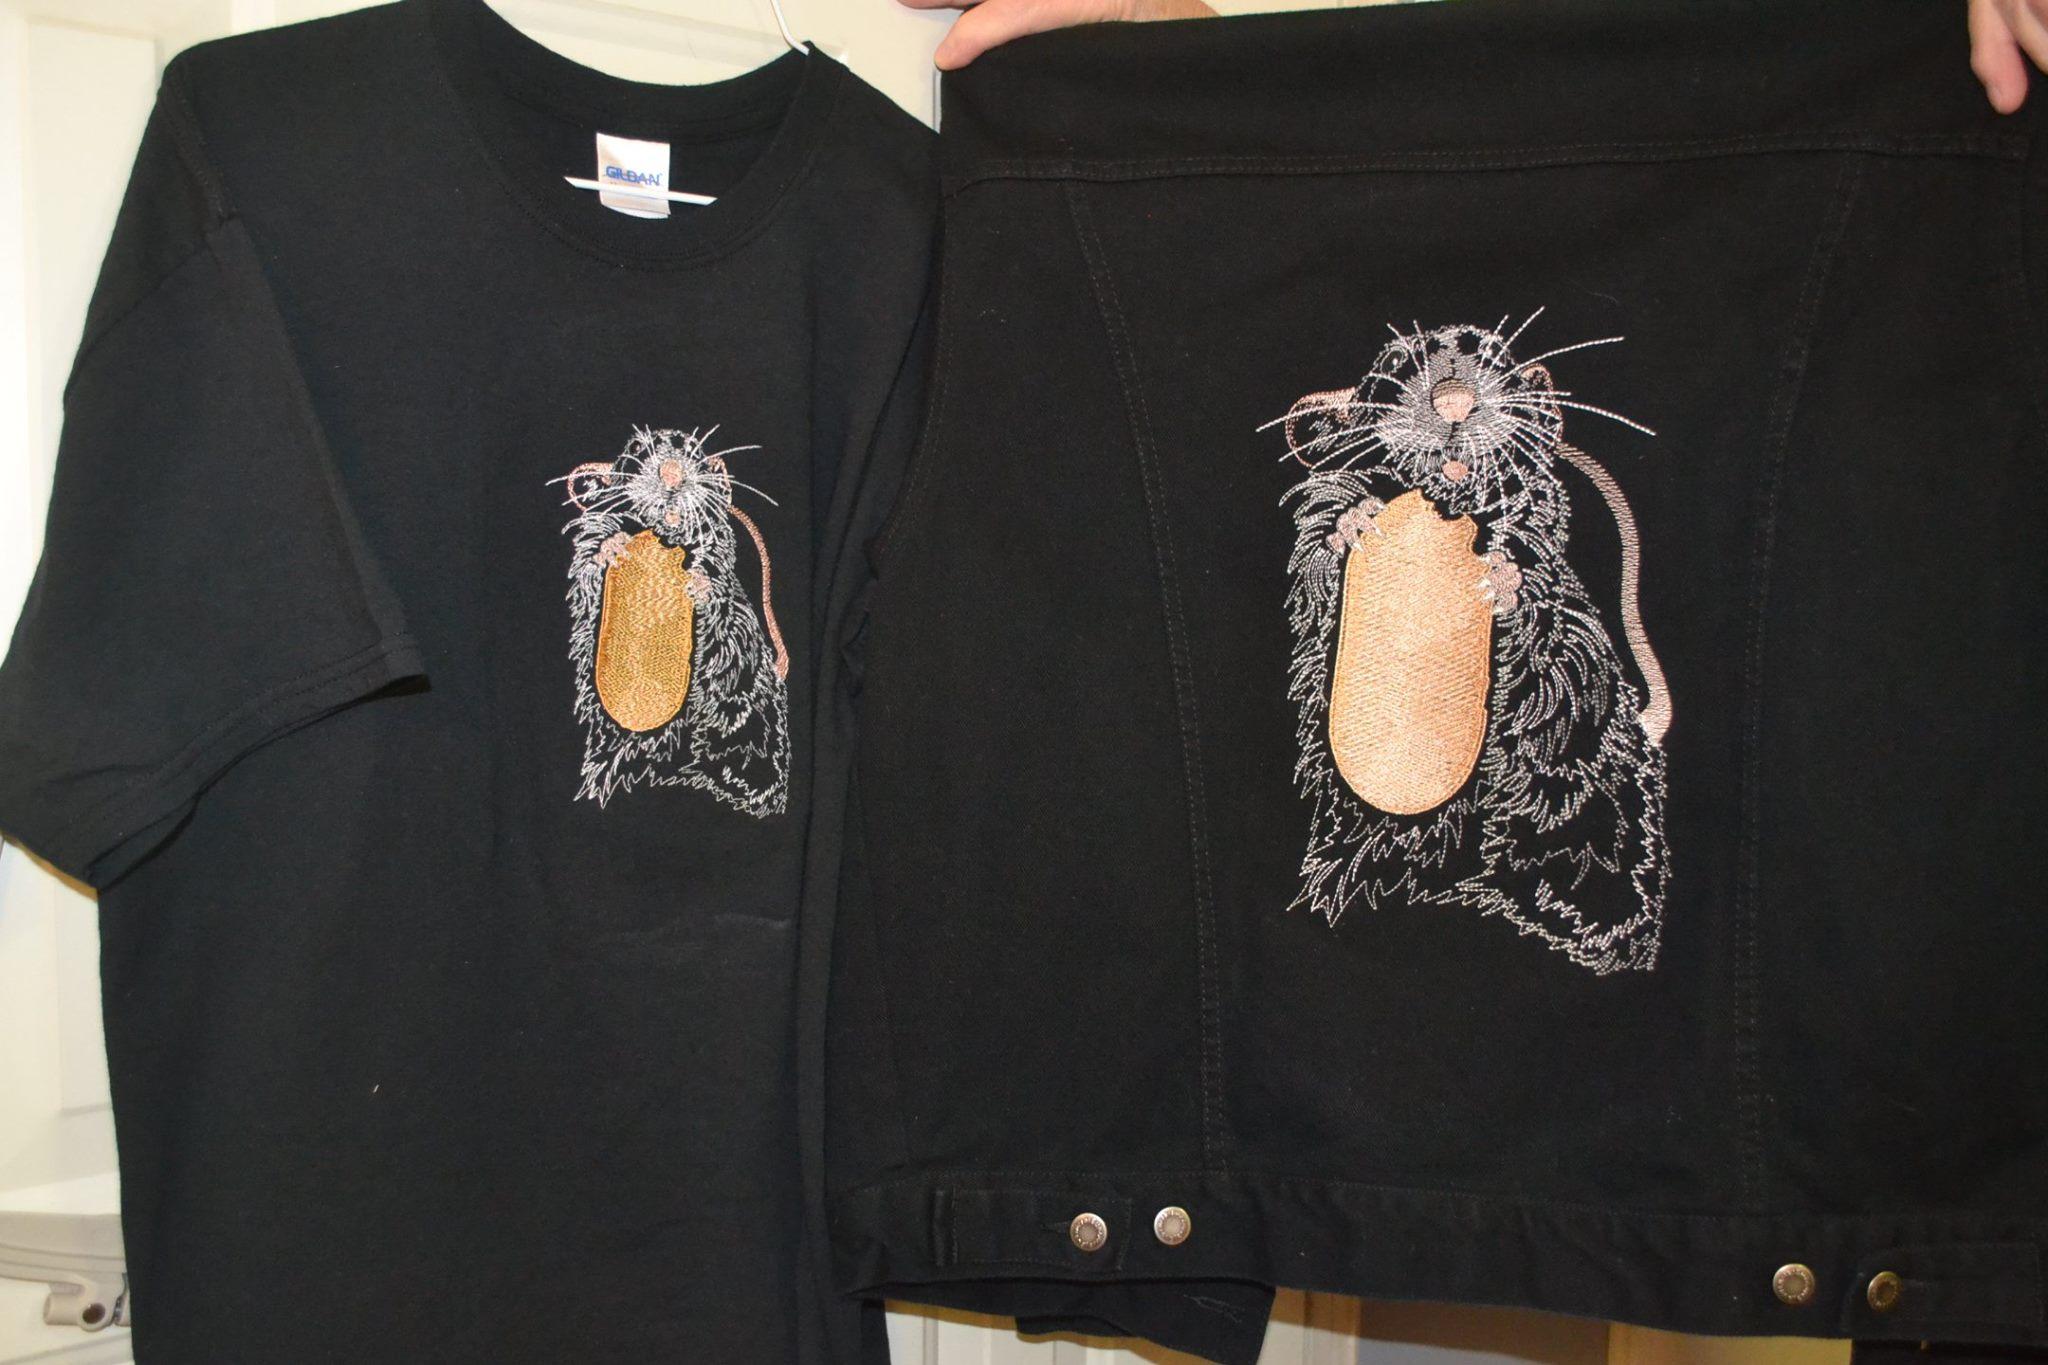 Black cotton shirt with Rat embroidery design